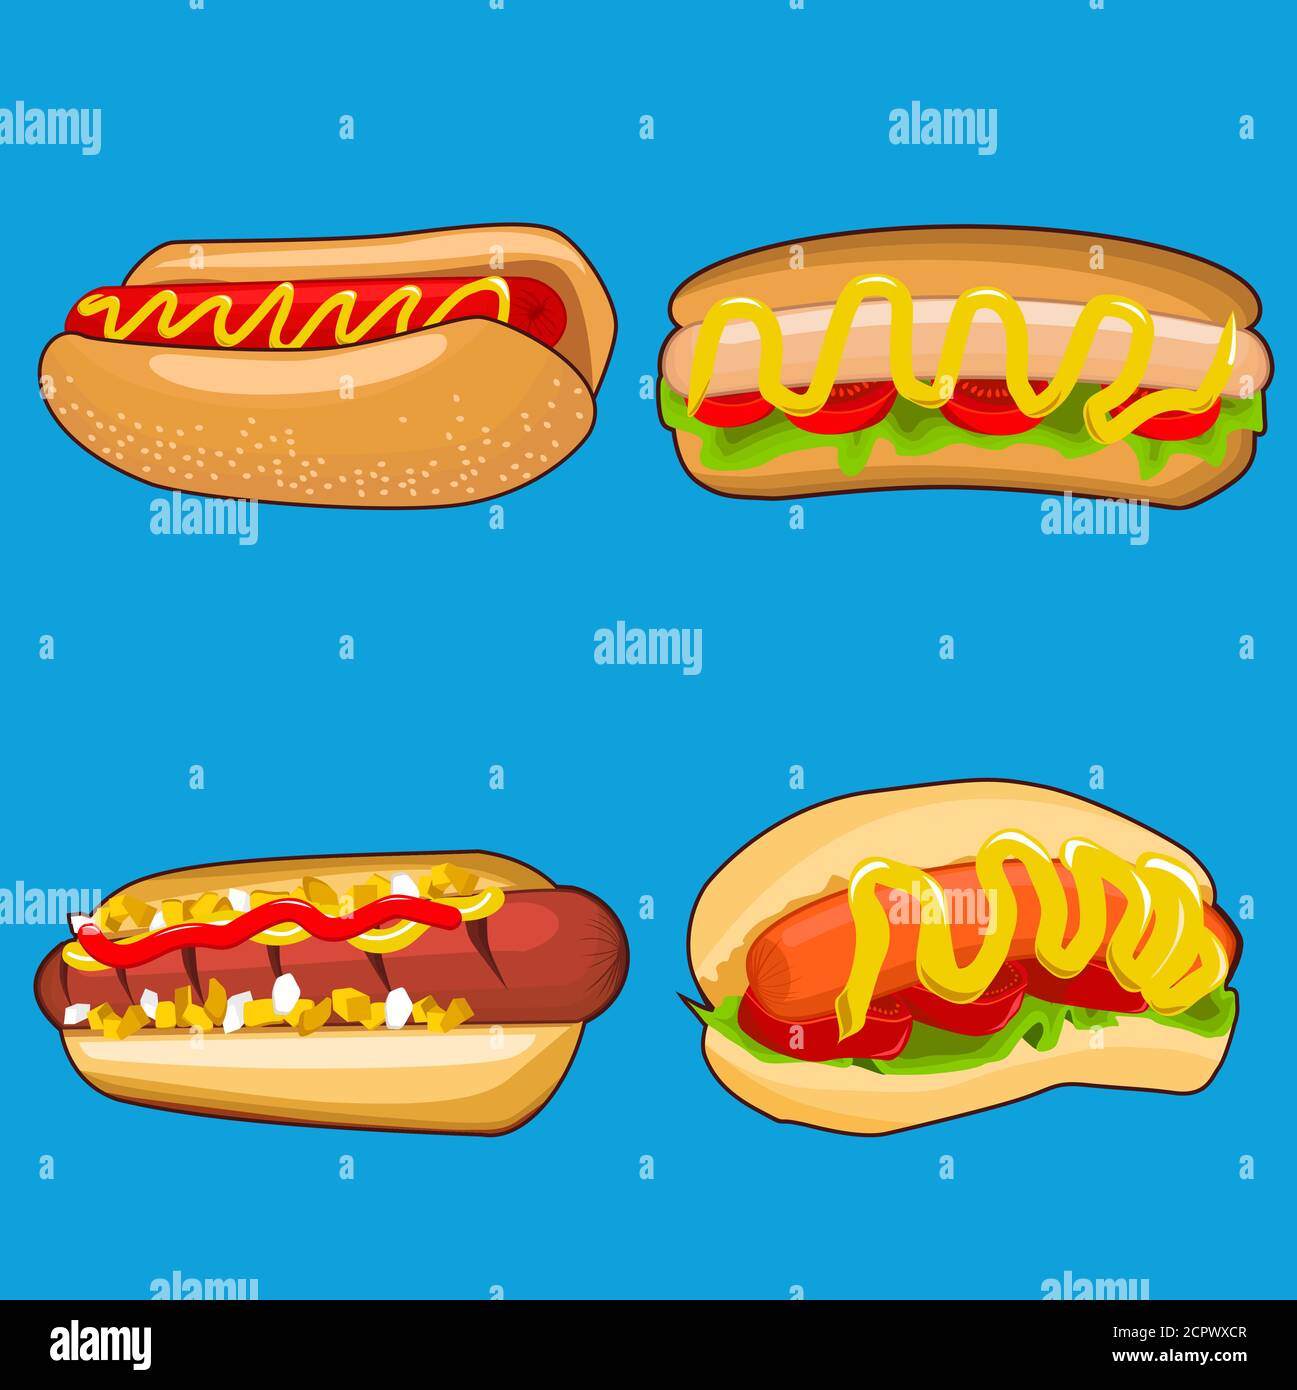 Vector Illustration Of a hot dog fast food menu design with sausage & mustard, hot dog icon vector Stock Vector